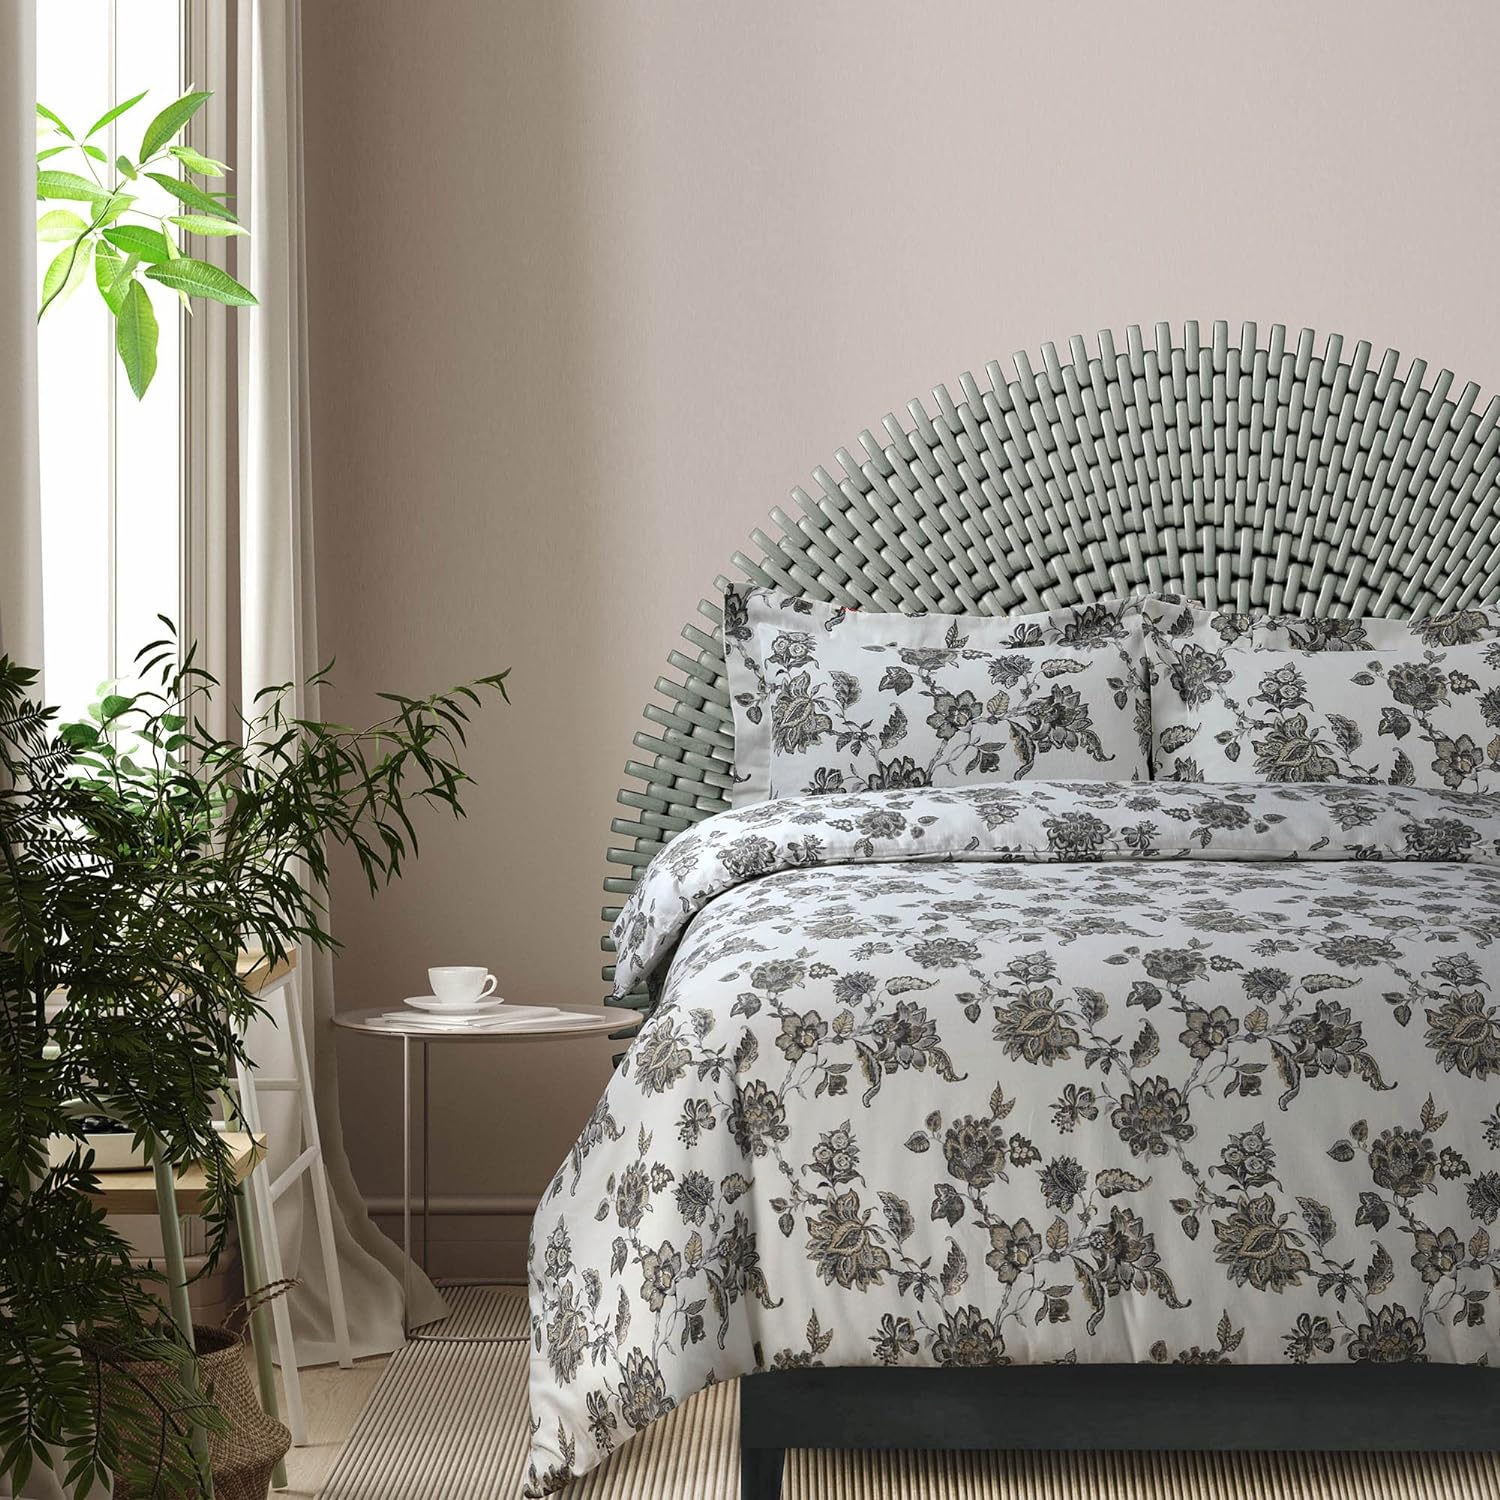 Best Patterned Duvet Covers, a selection of personalized and creative patterned duvet covers. Our Personalised Duvet Cover range allows you to customise your own patterns for a unique home style; The Patterned Duvet Cover Queen is sized for large beds, adding warmth and beauty to your bedroom.